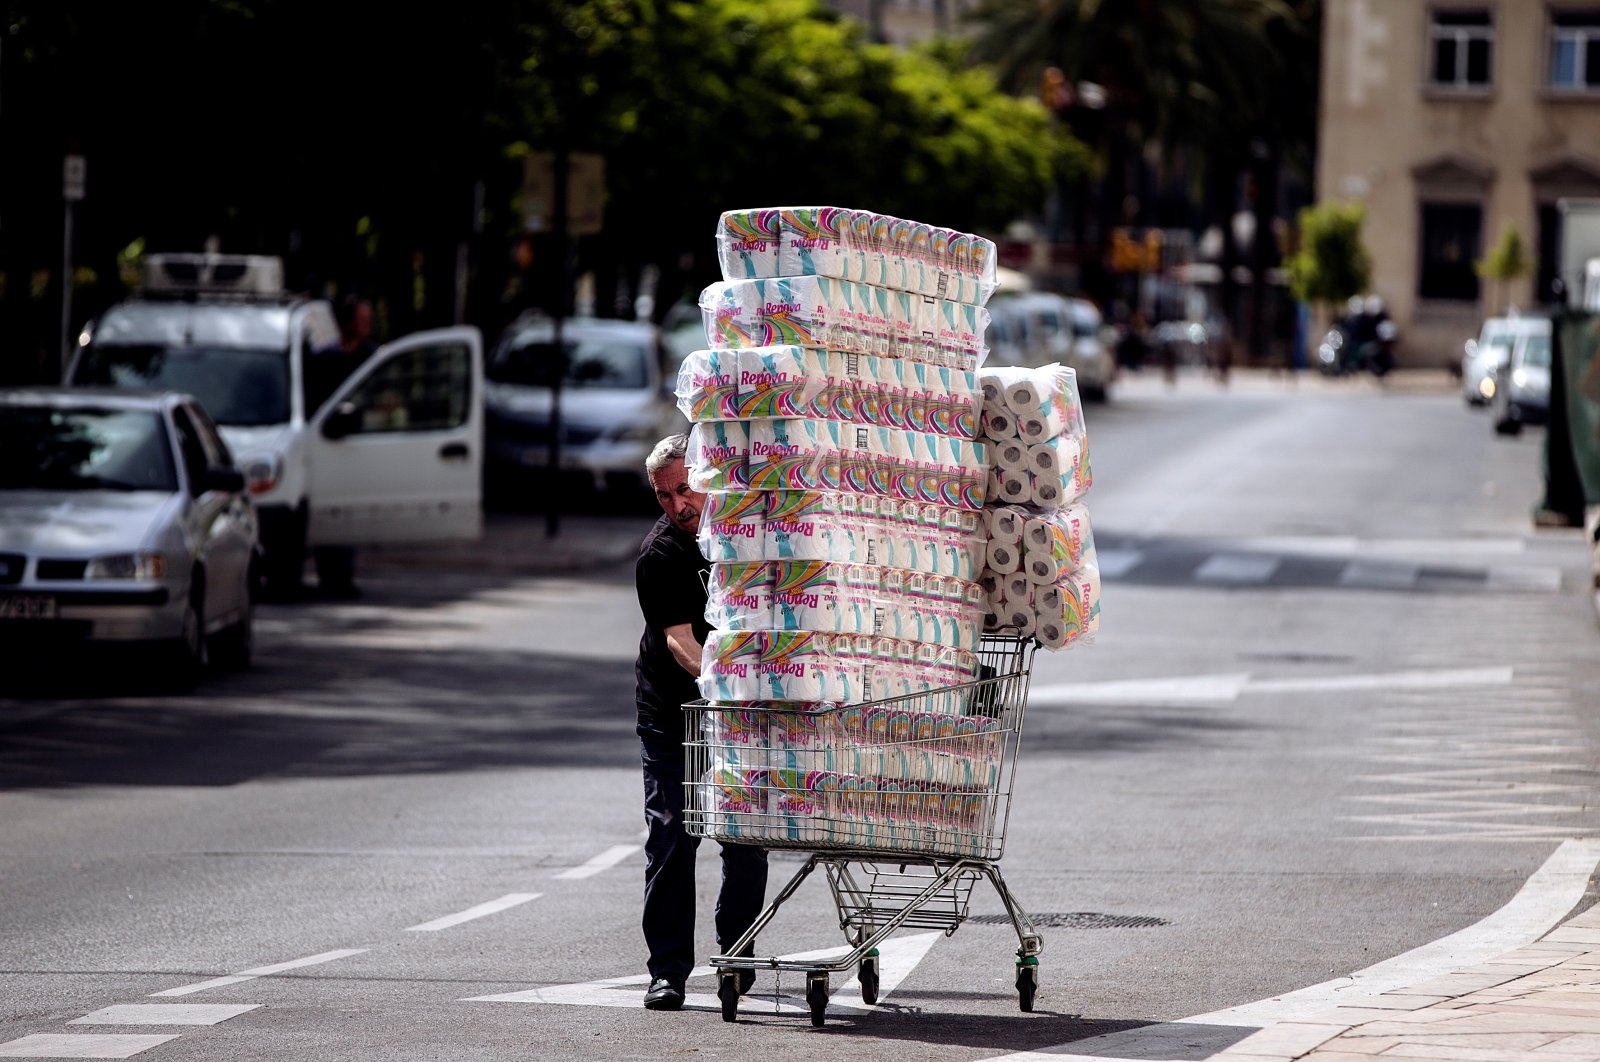 A worker carries many rolls of toilet paper to be sold at a mall in Malaga, Andalusia, Spain, March 12, 2020. (EPA Photo)